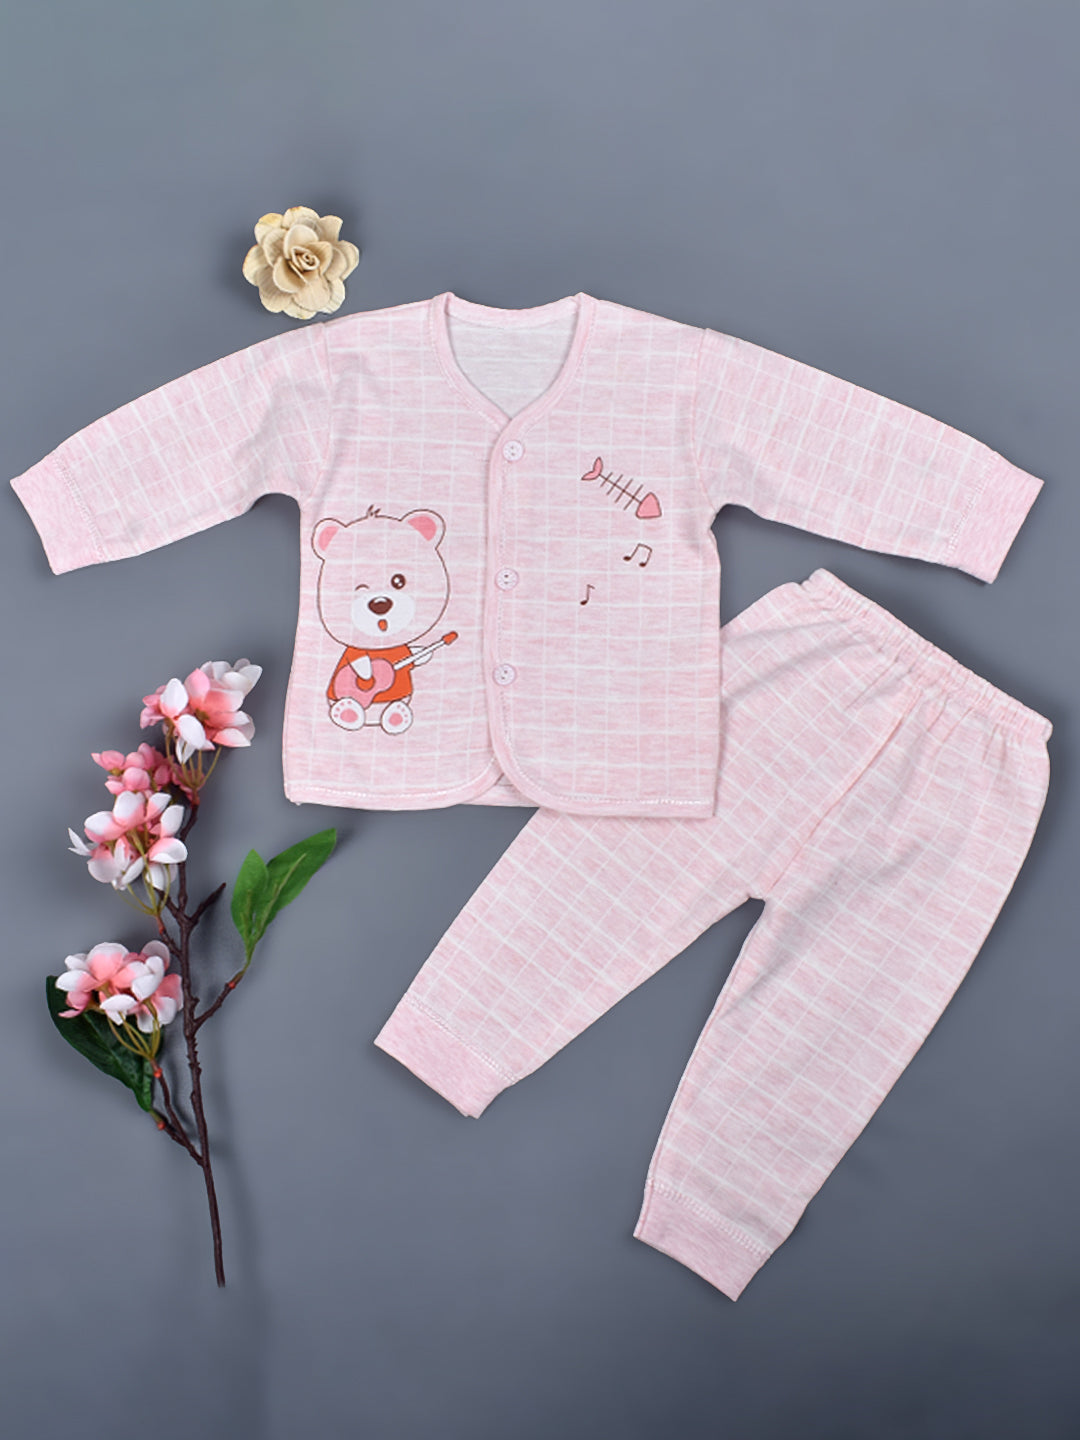 Baby's Warm Unisex Cotton Suit Set - 1Pajama and 1Shirt- Pink Check